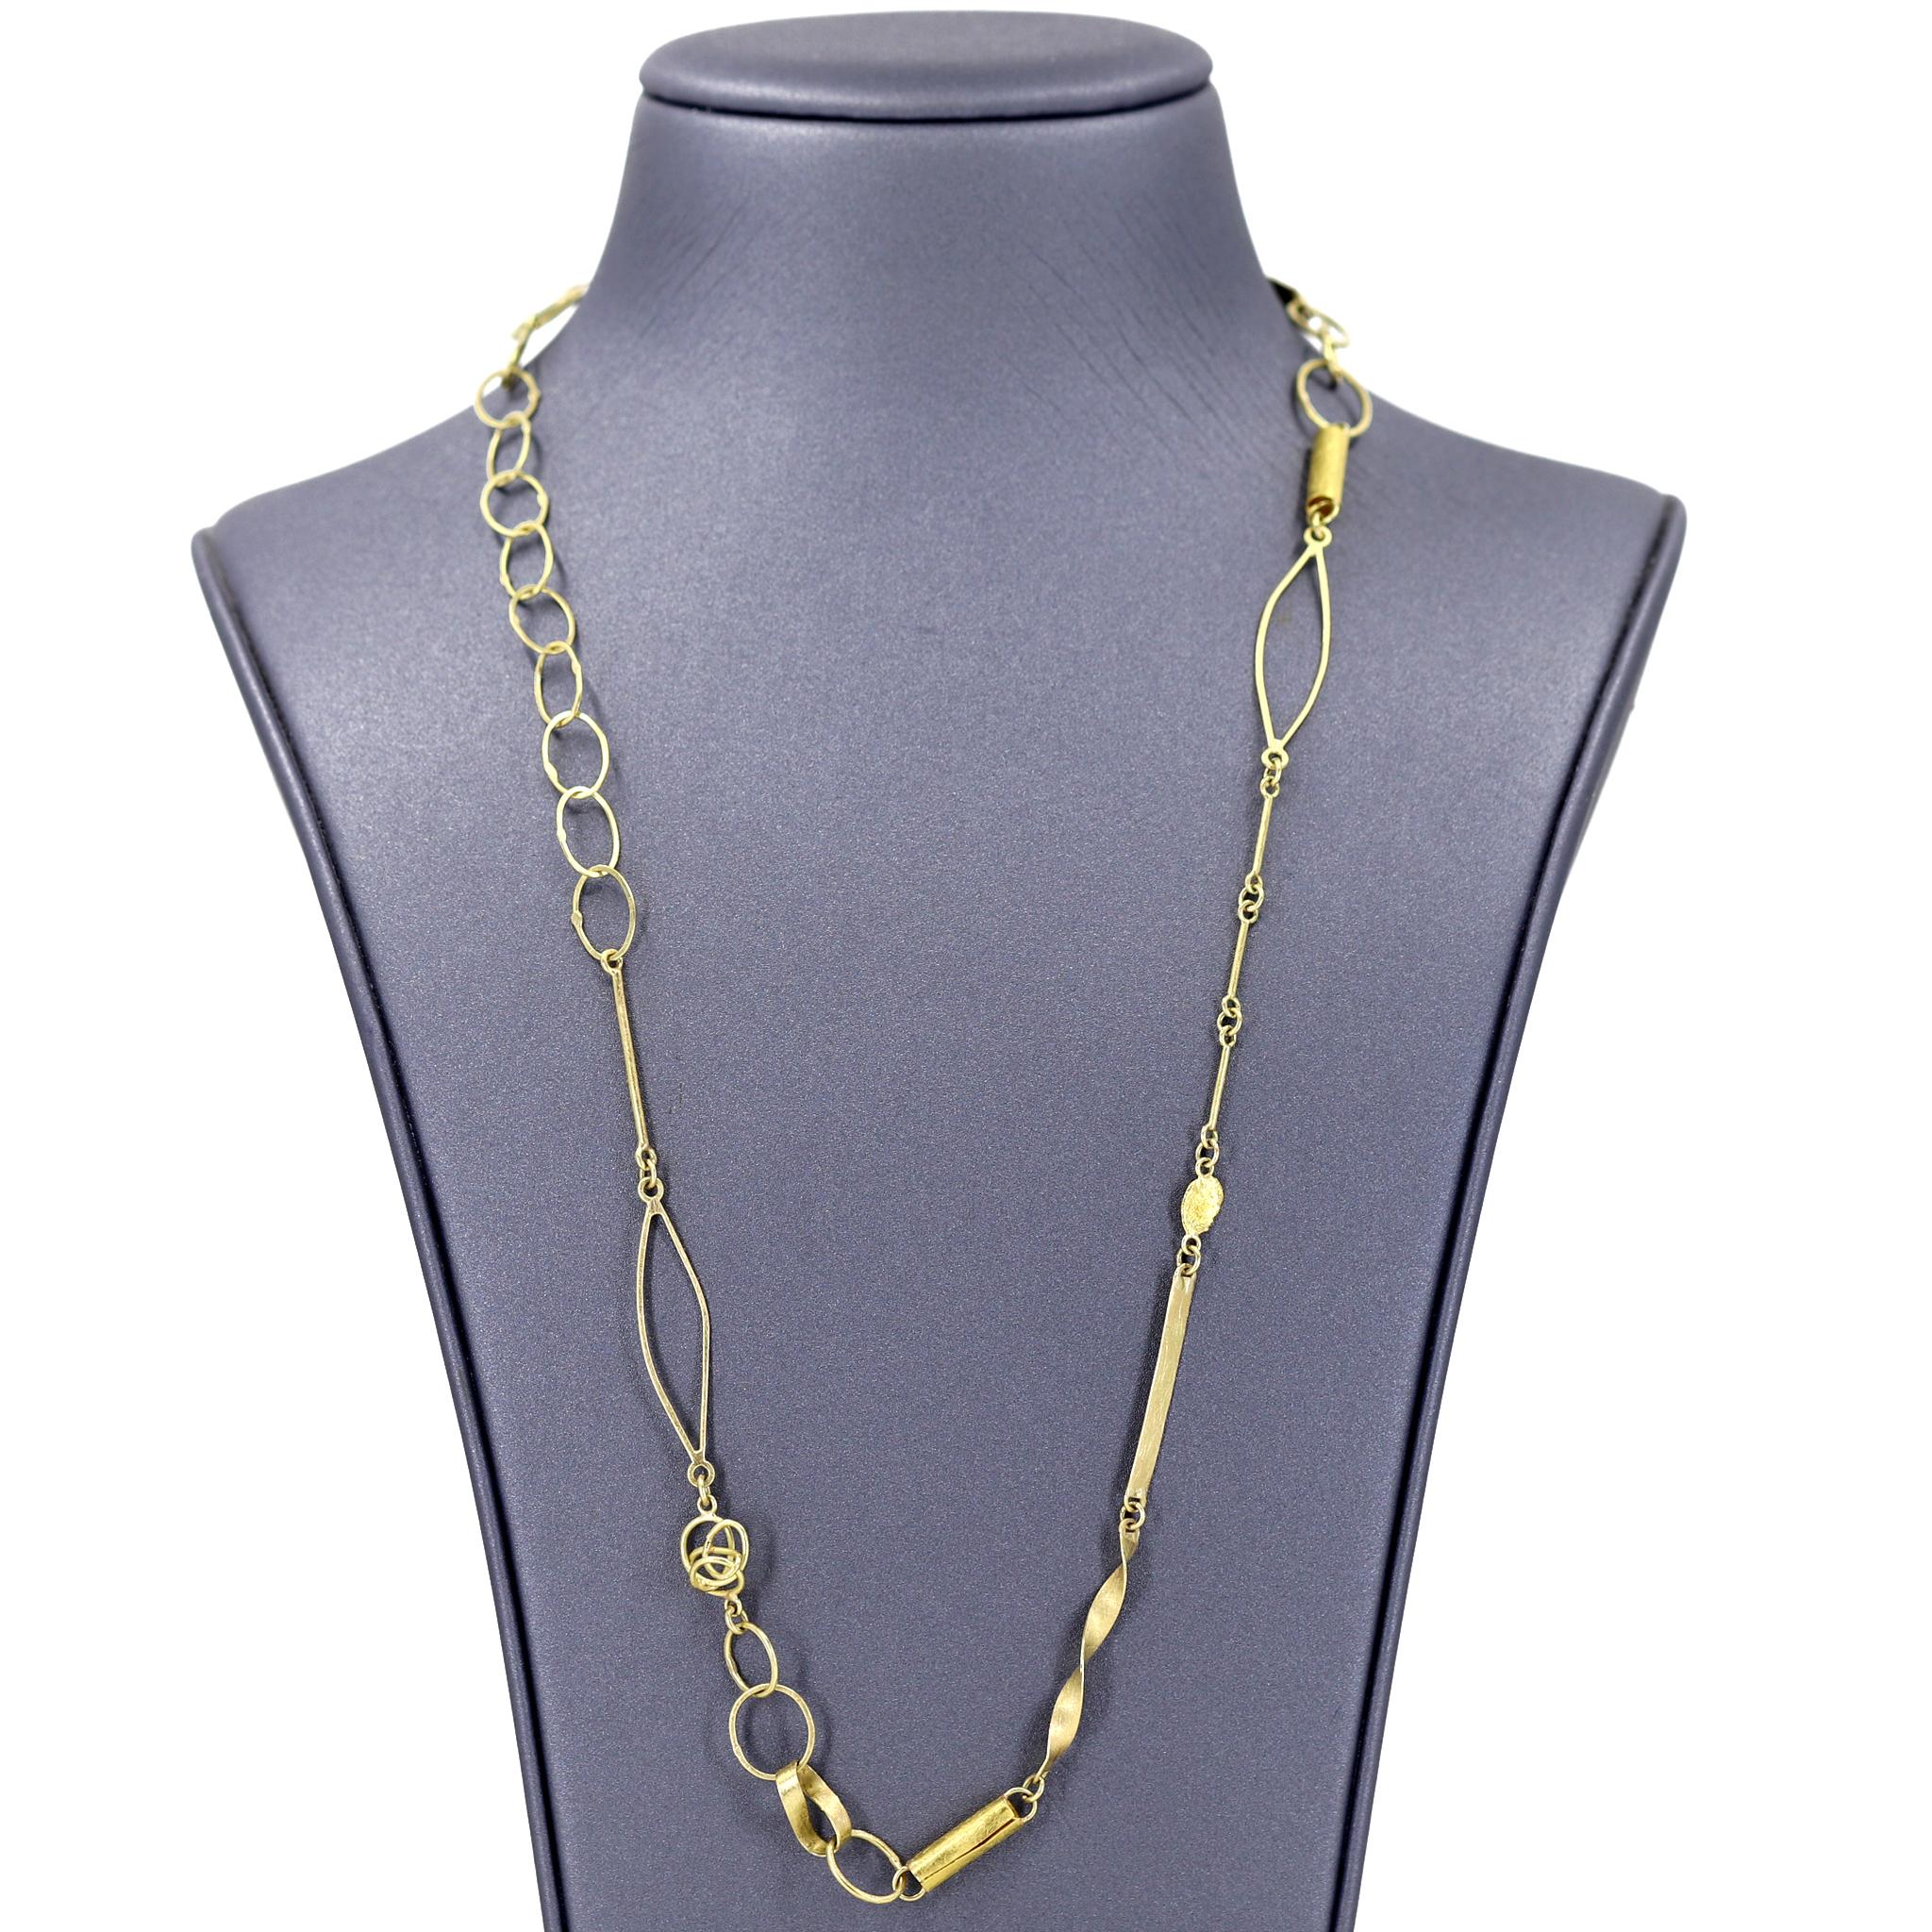 One of a Kind Mix 'n Mingle Chain hand-fabricated by jewelry maker Petra Class featuring a spectacular assortment of the artist's signature 18k yellow gold and 22k yellow gold links intricately laid out and connected to optimize wearability in